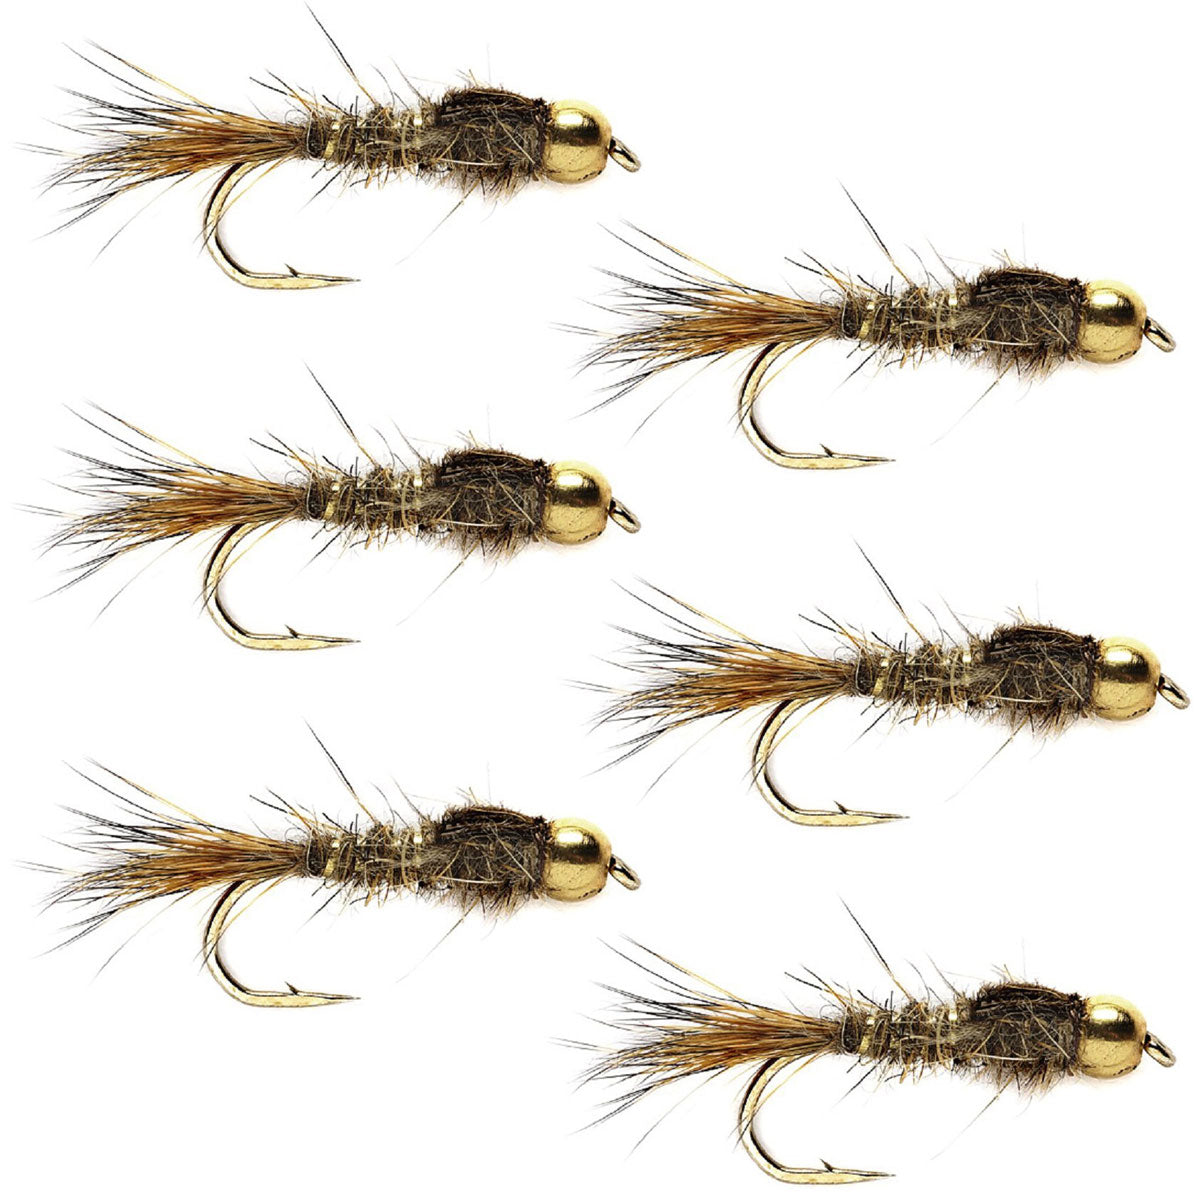 Bead Head Nymph Fly Fishing Flies - Gold Ribbed Hare's Ear Trout Fly - Nymph Wet Fly - 6 Flies Hook Size 10